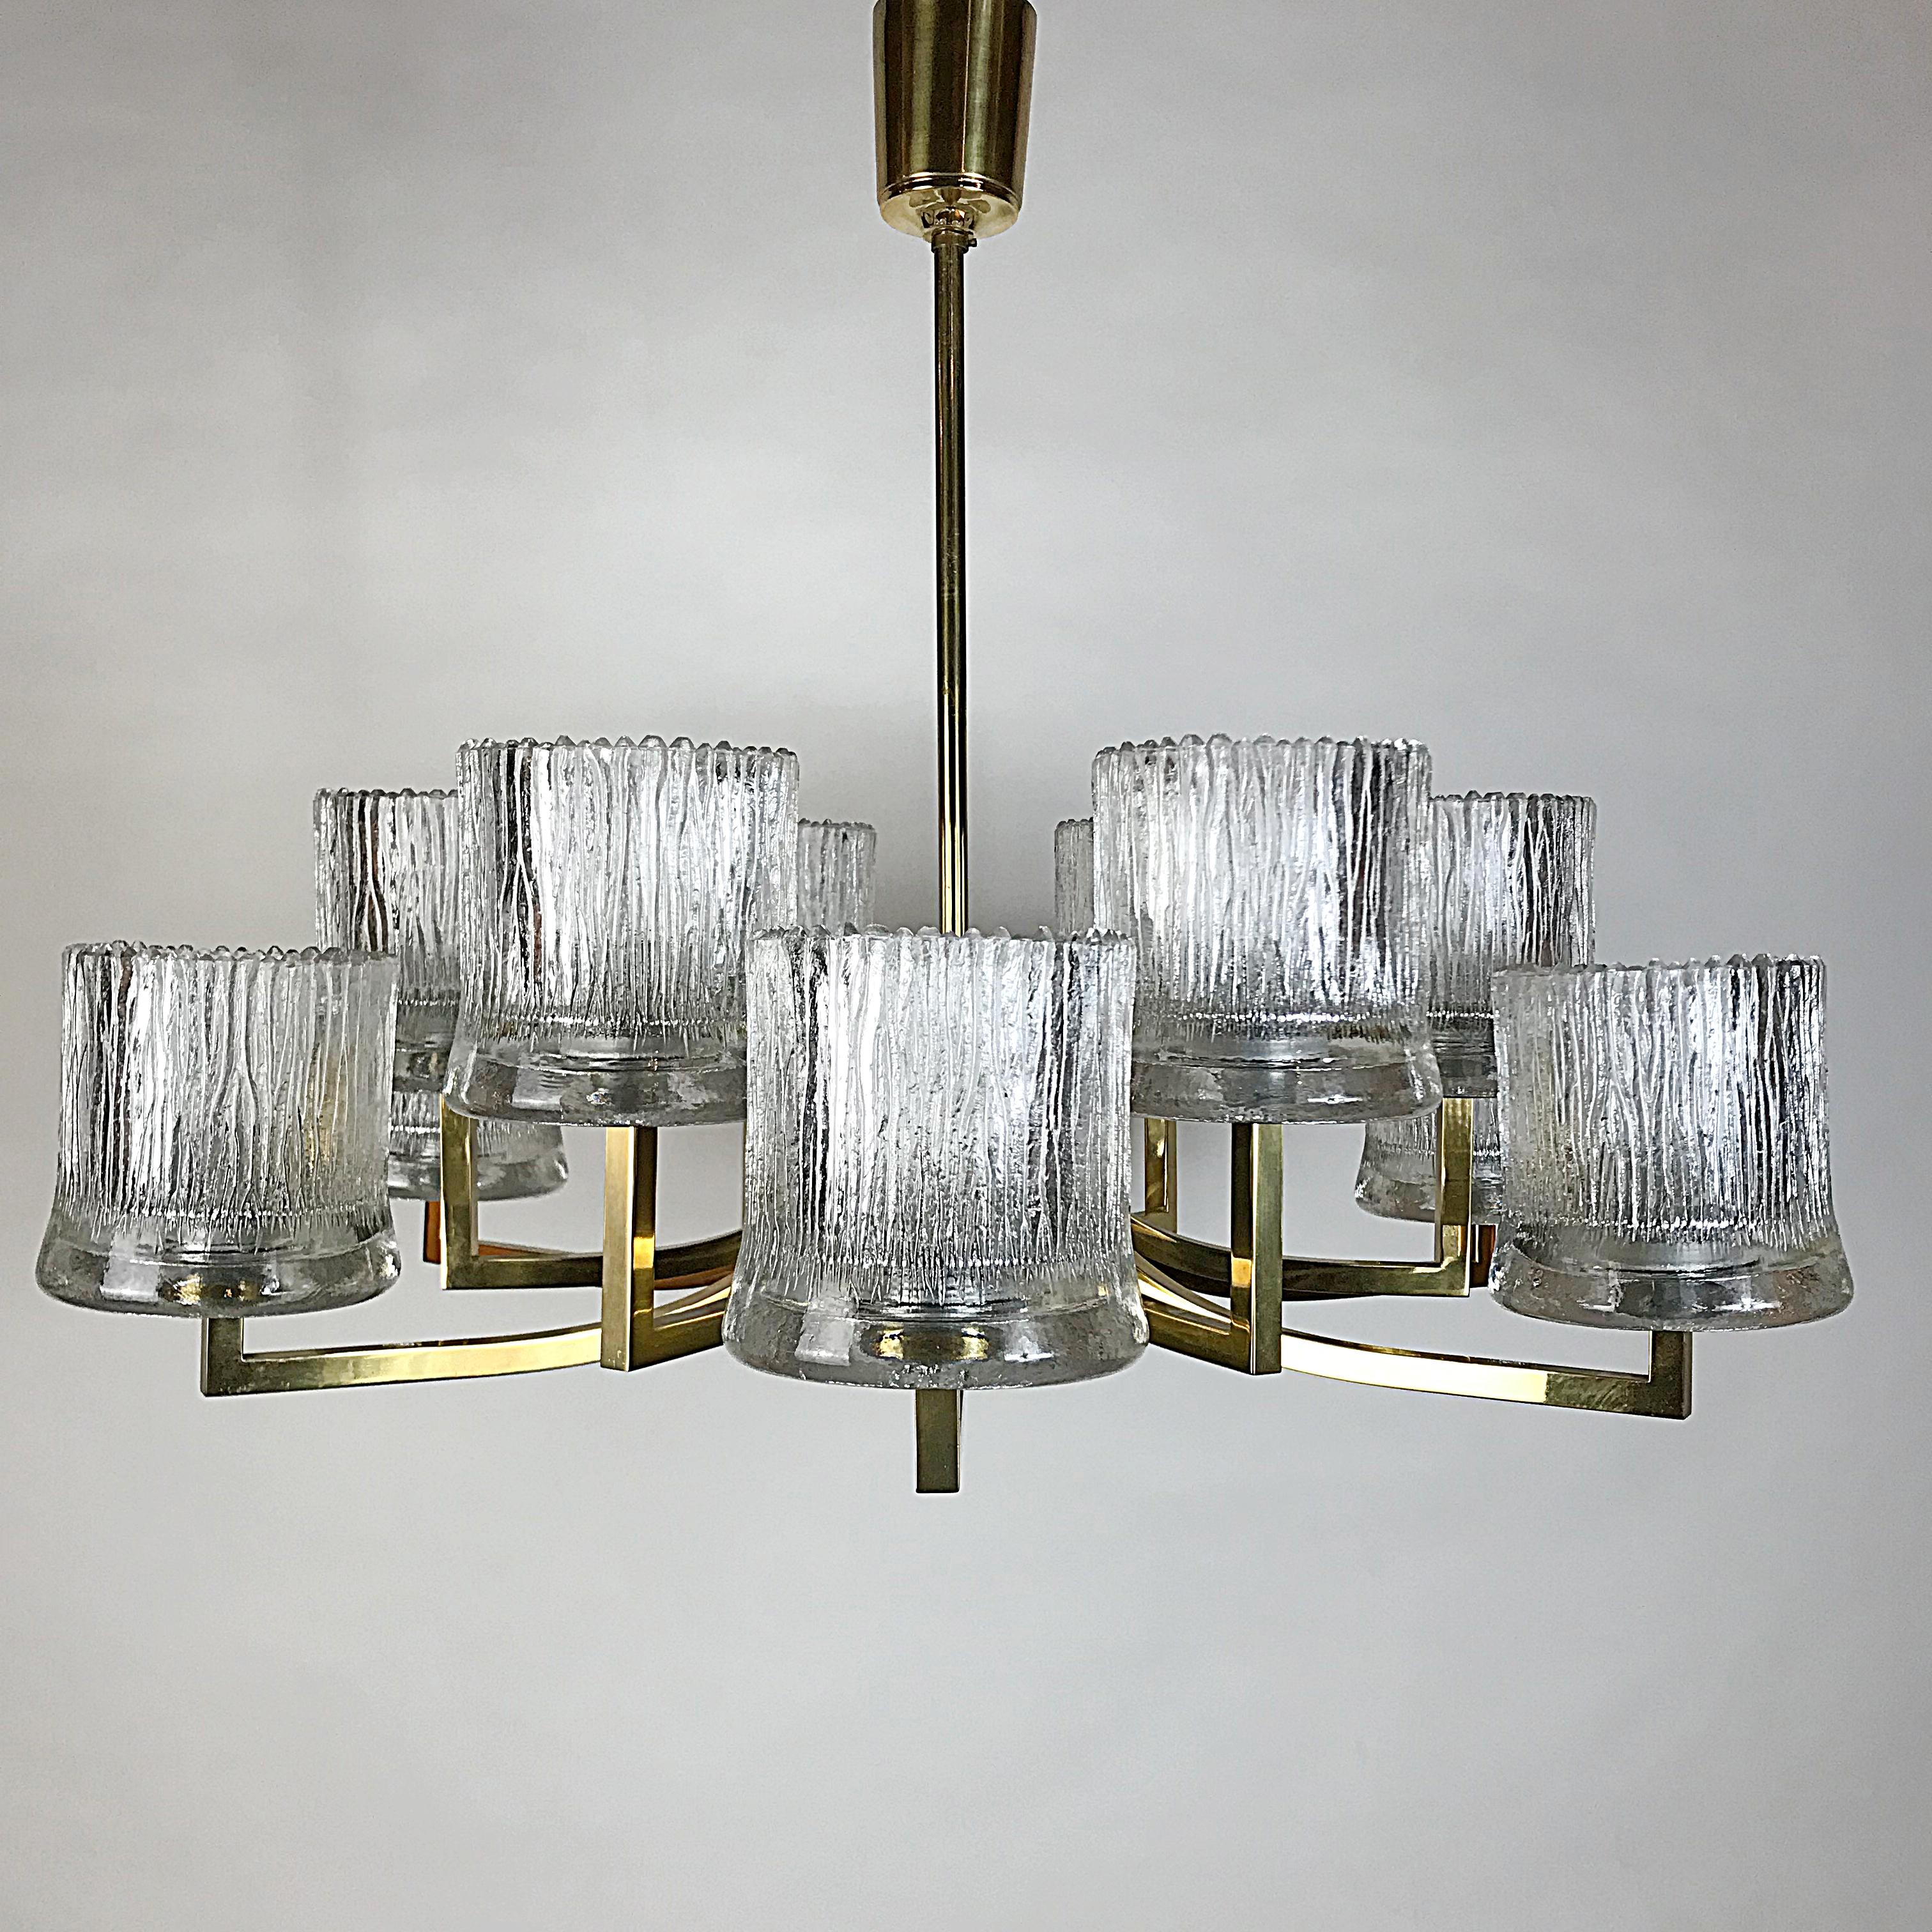 Huge beautiful Mid-Century Modern chandelier manufactured by Hillebrand, with the characteristic blown ice glass cups and brass frame. This chandelier is a striking appearance in every room. Due to the sublime combination of glass and chrome, this